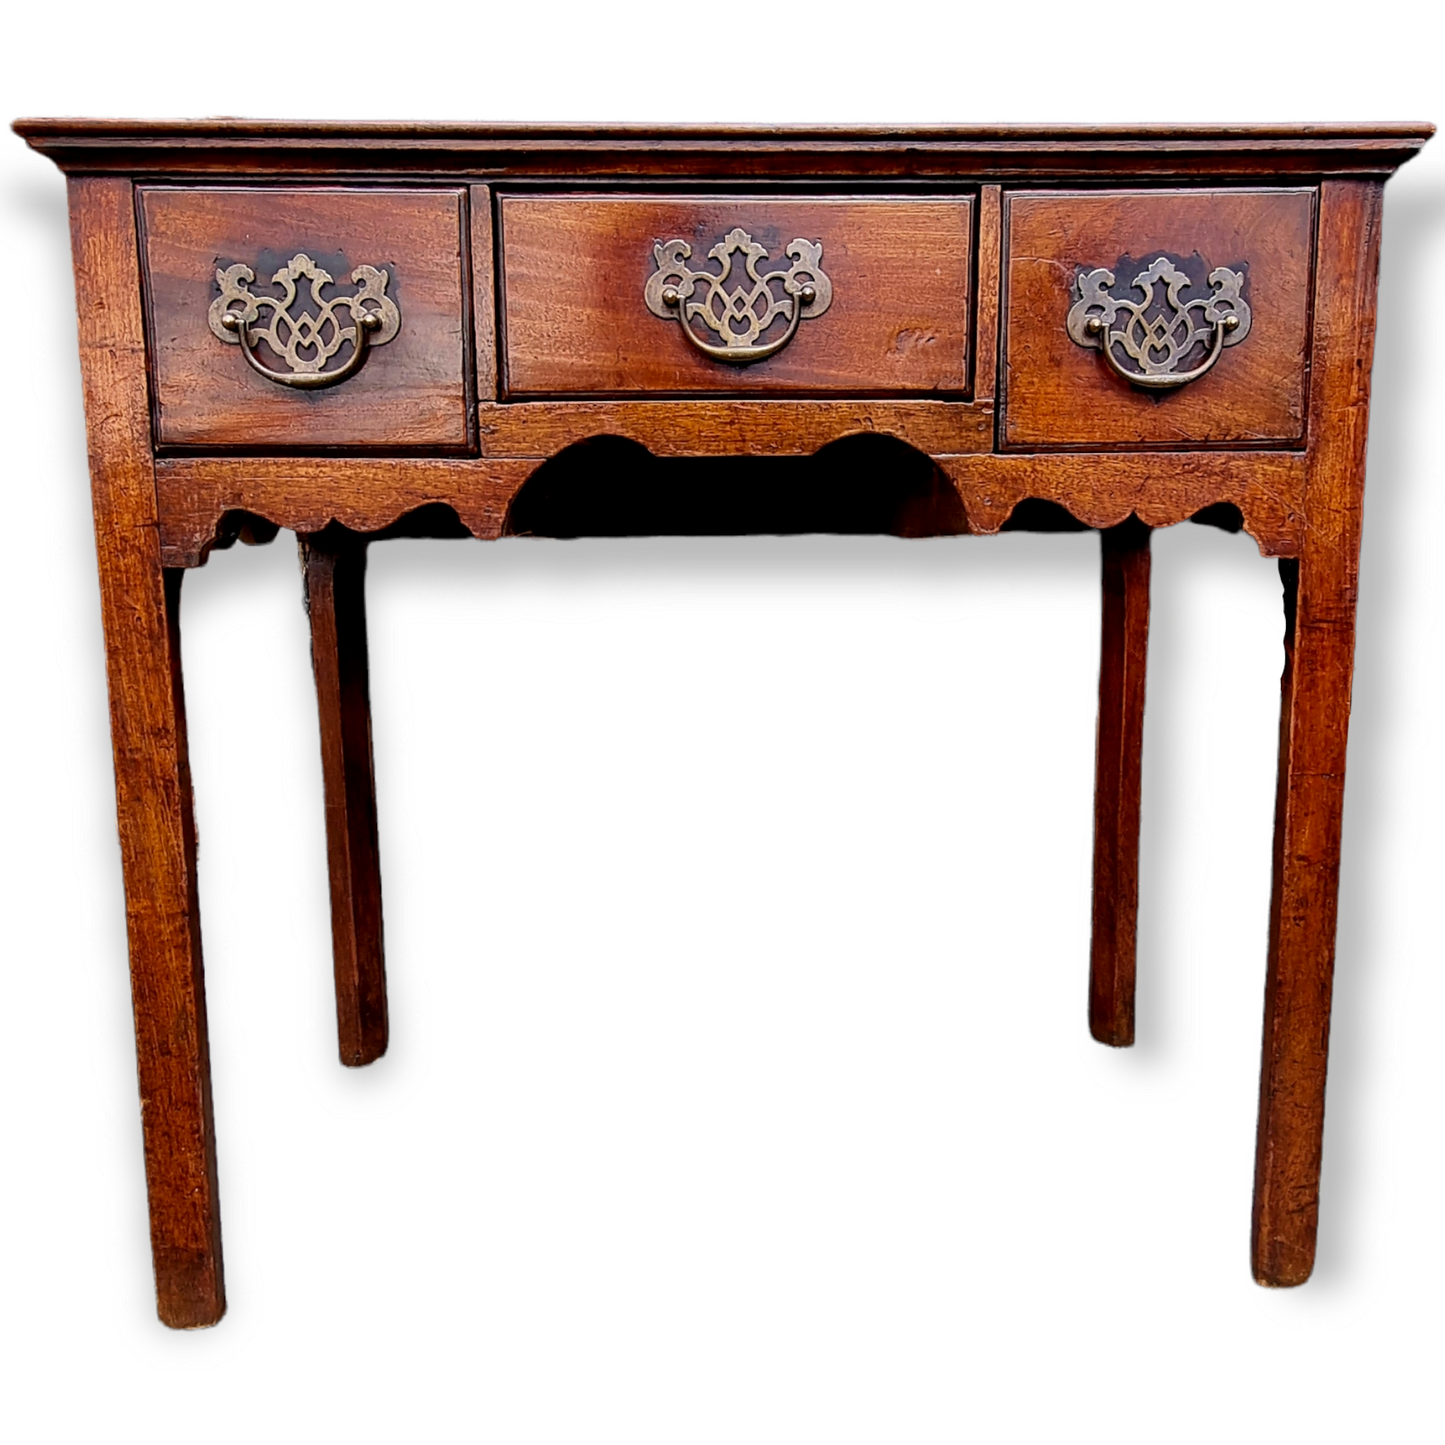 Late 18th Century English Antique Walnut Low Boy or Side Table